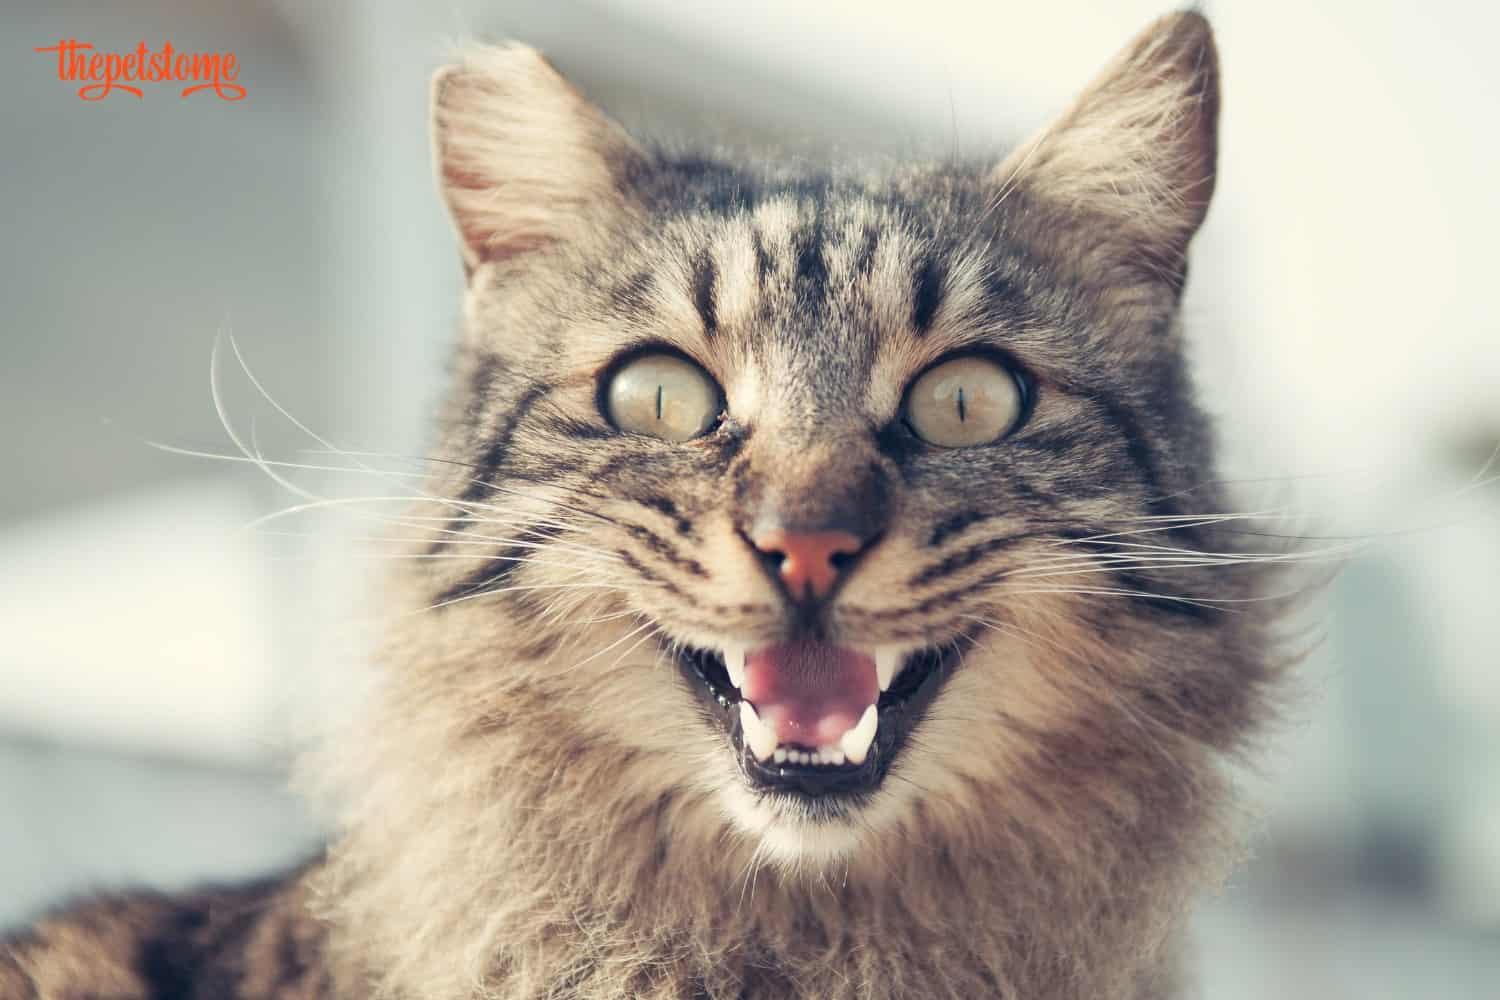 What Does It Mean When a Cat Opens Its Mouth at You